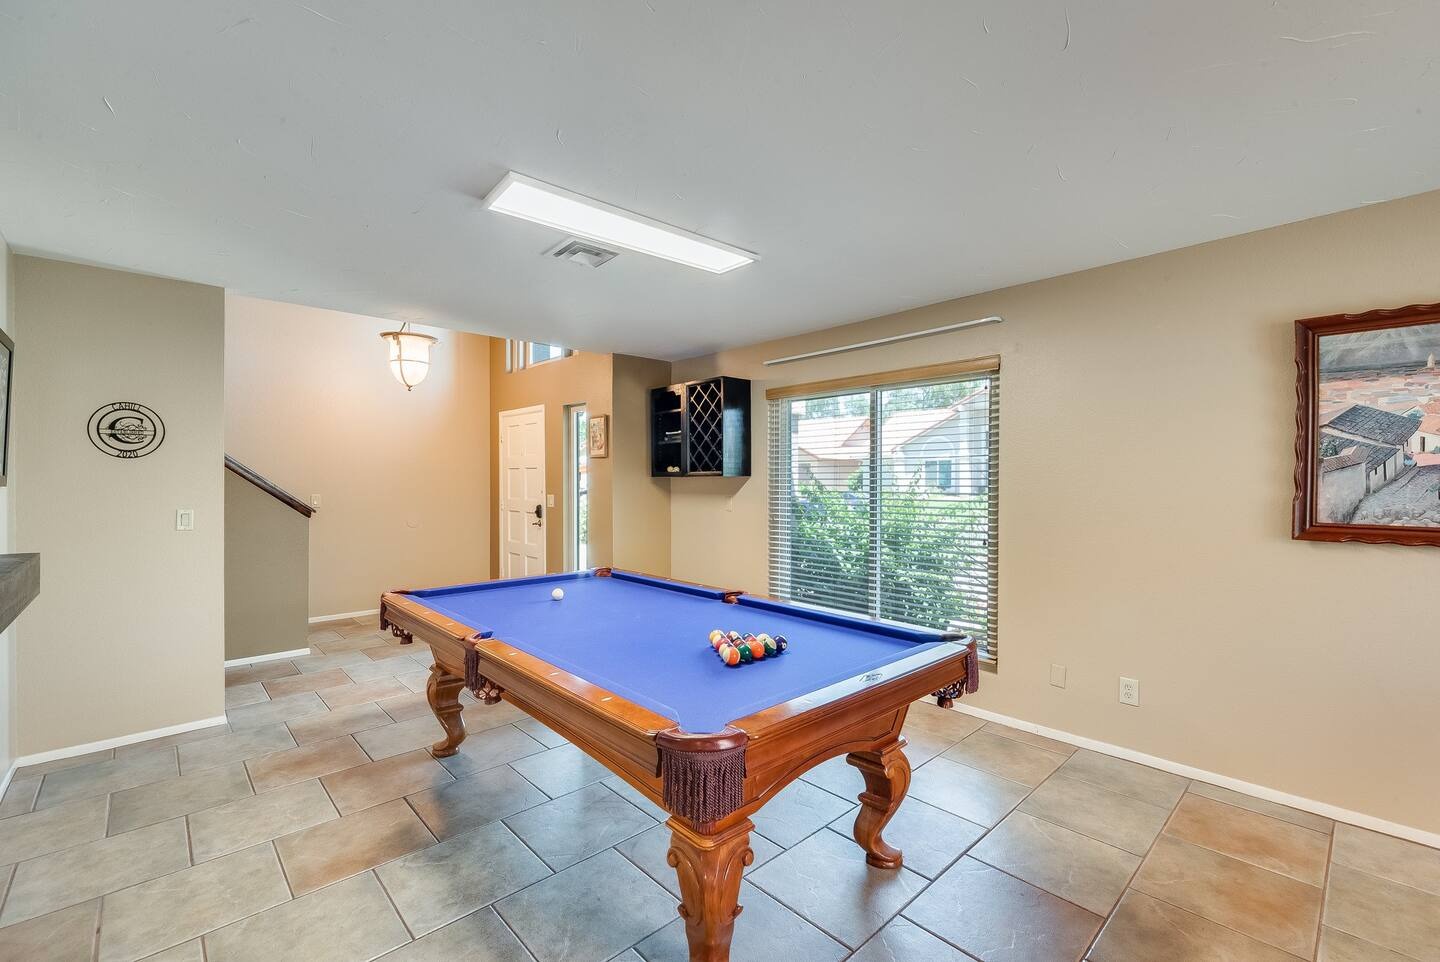 Glendale Vacation Rentals, Cahill Casa - Pool table